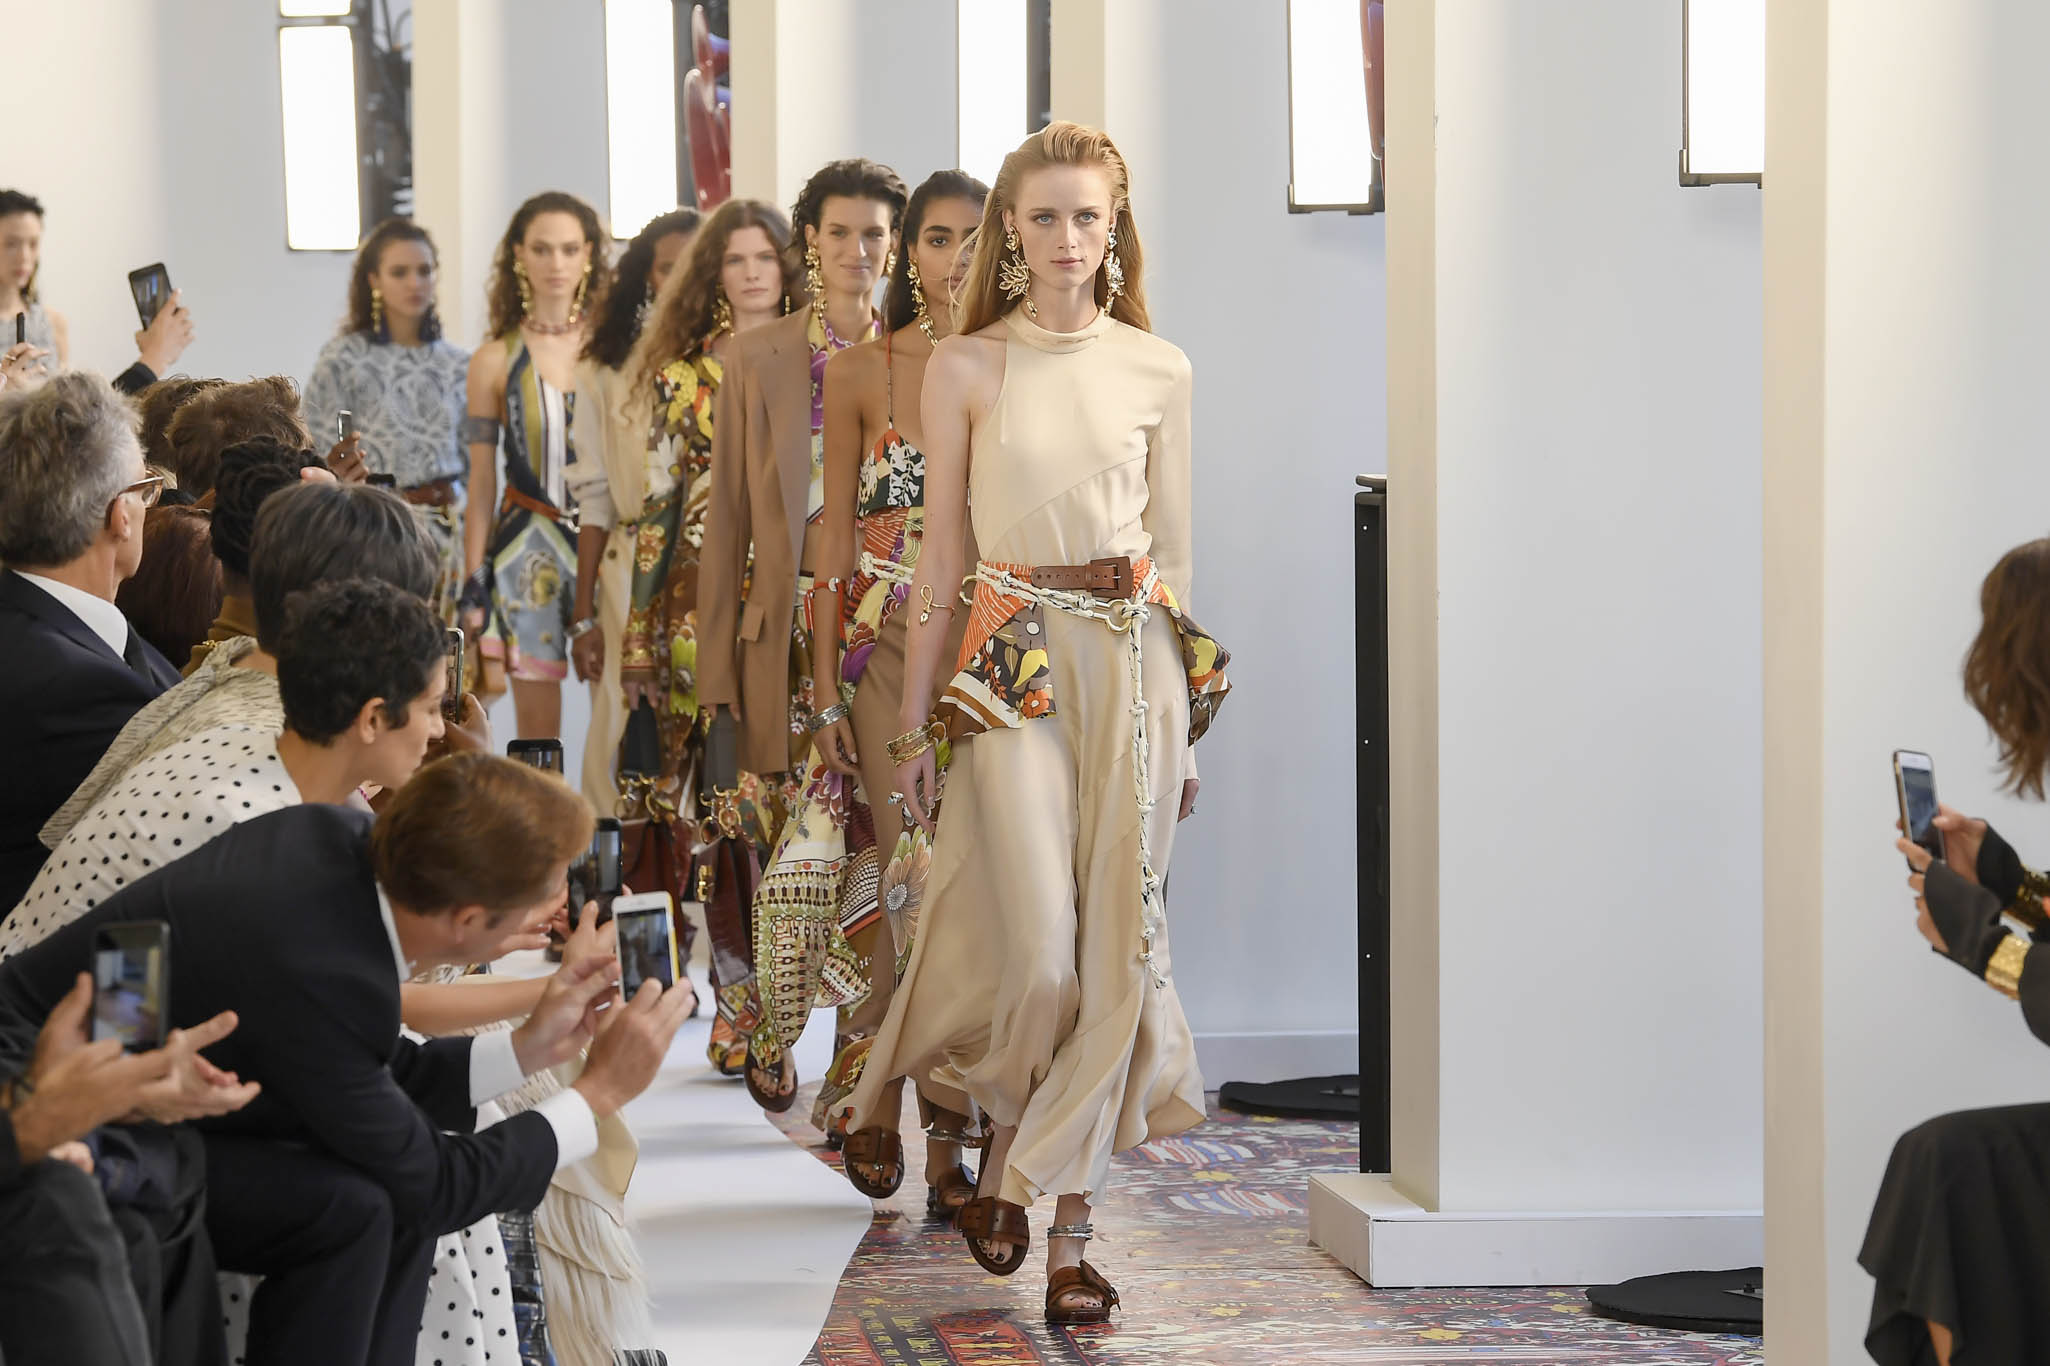 Chloé Fashion: What You Need to Know About the French Brand